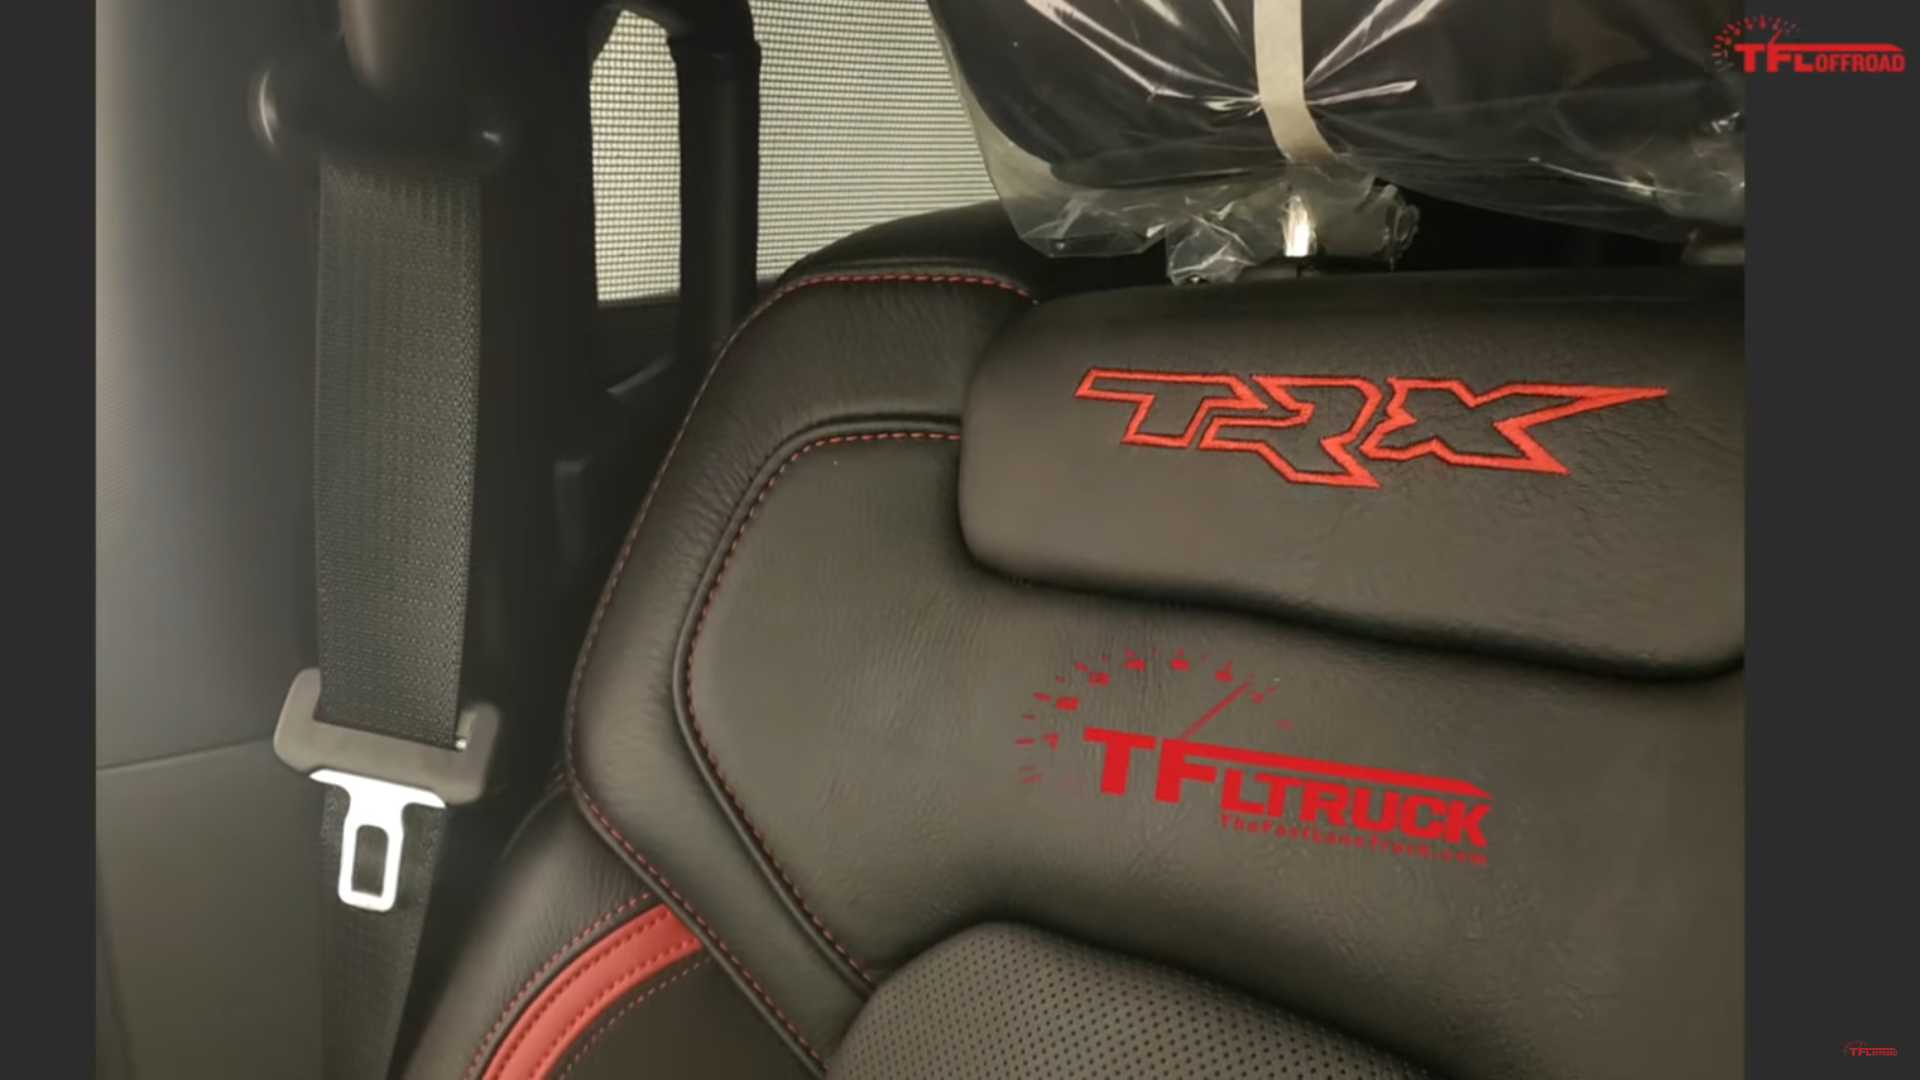 Ram Rebel TRX Image Show Interior and Engine, Sound Caught on Video